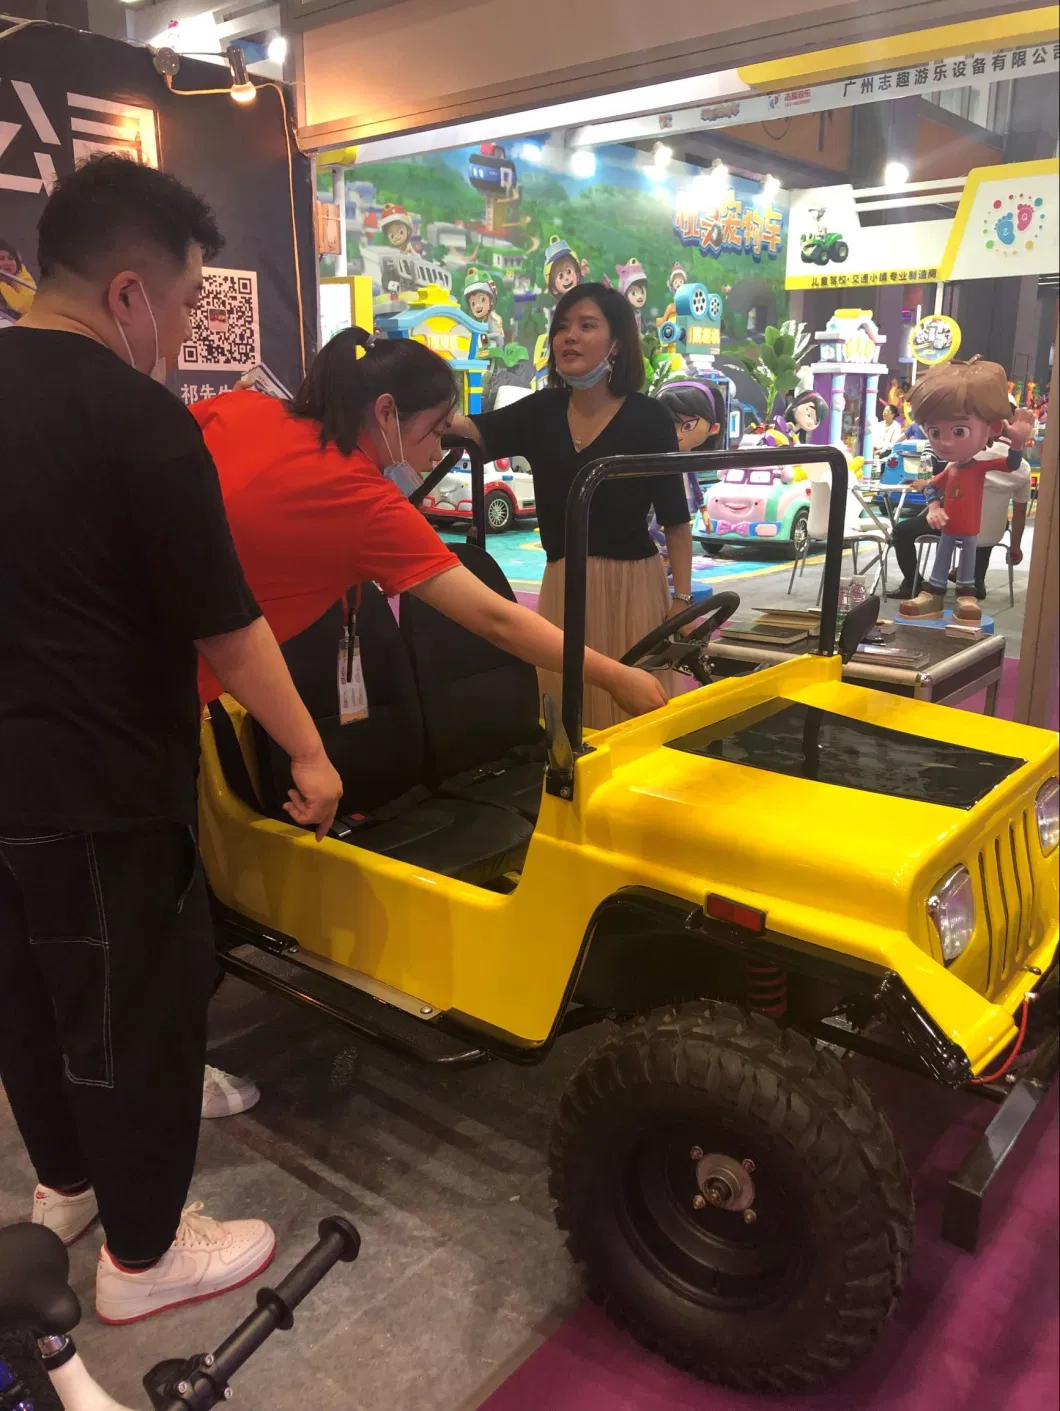 Wholesale Electric 1500W Battery Powered ATV All Terrain Mini Jeep Willys for Adults and Kids 4*4